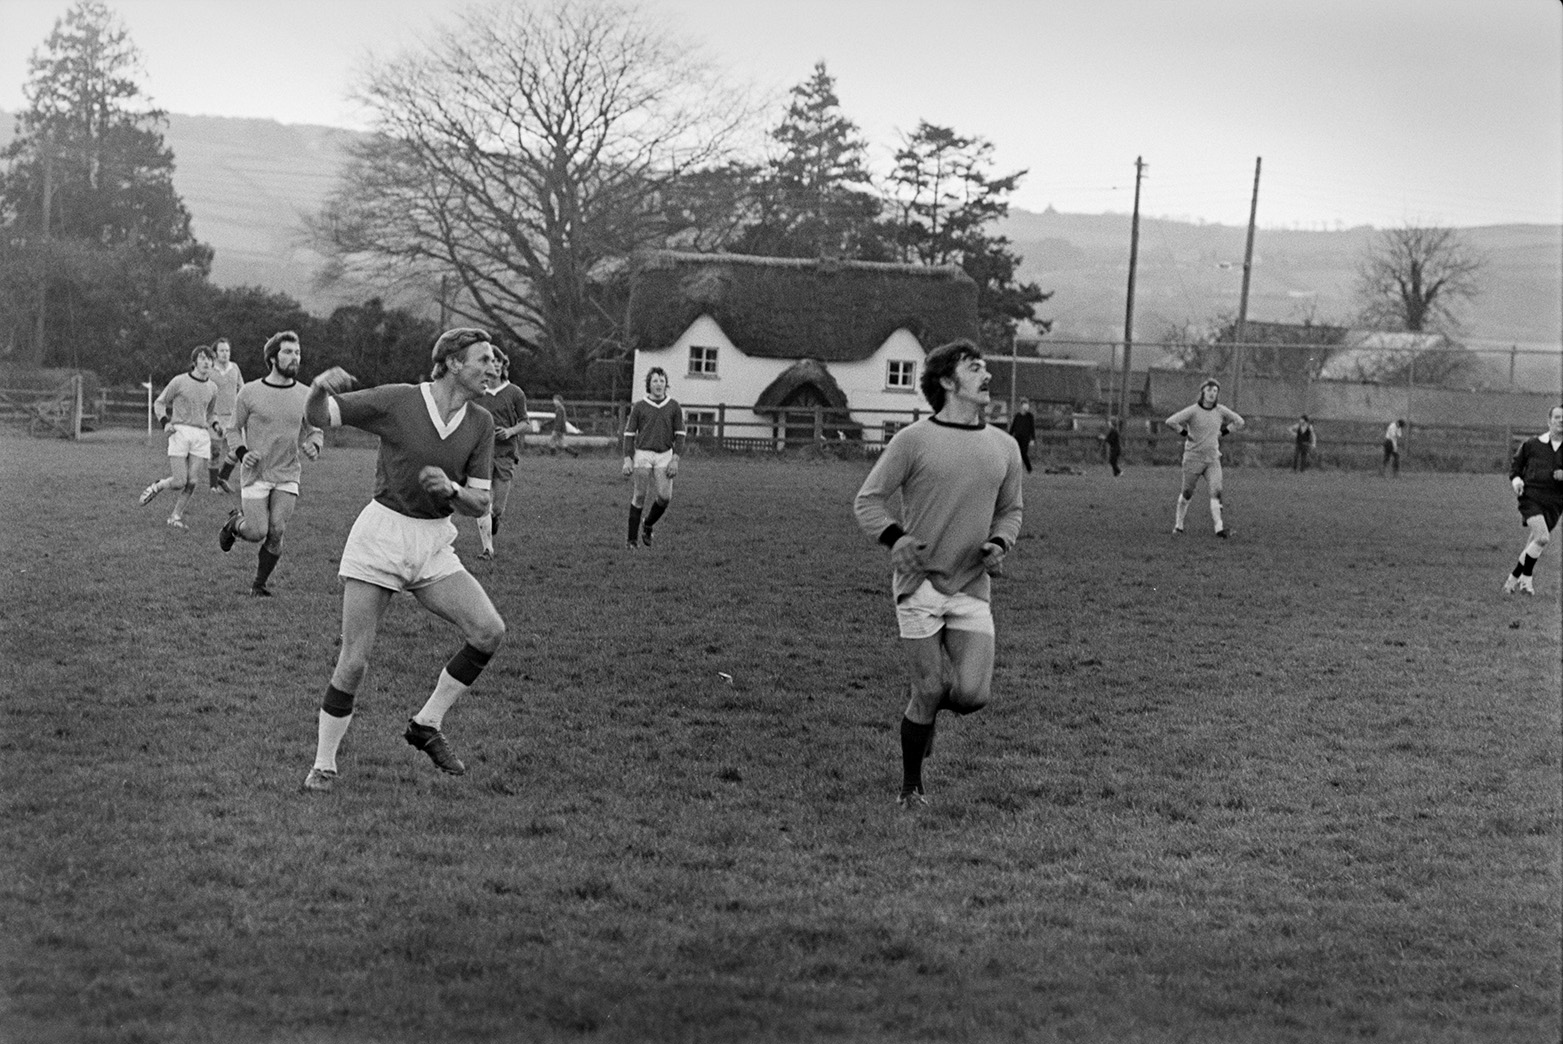 Football match between Merton and Dolton at Merton. Football players are on the pitch. Ivor Bourne is in the foreground on the left and John Kelway is on the right. The player between them further back is possibly John Woodland and the man with his hands on his hips is possibly Les Jury. The thatched cottage in the background is New Road Cottage.